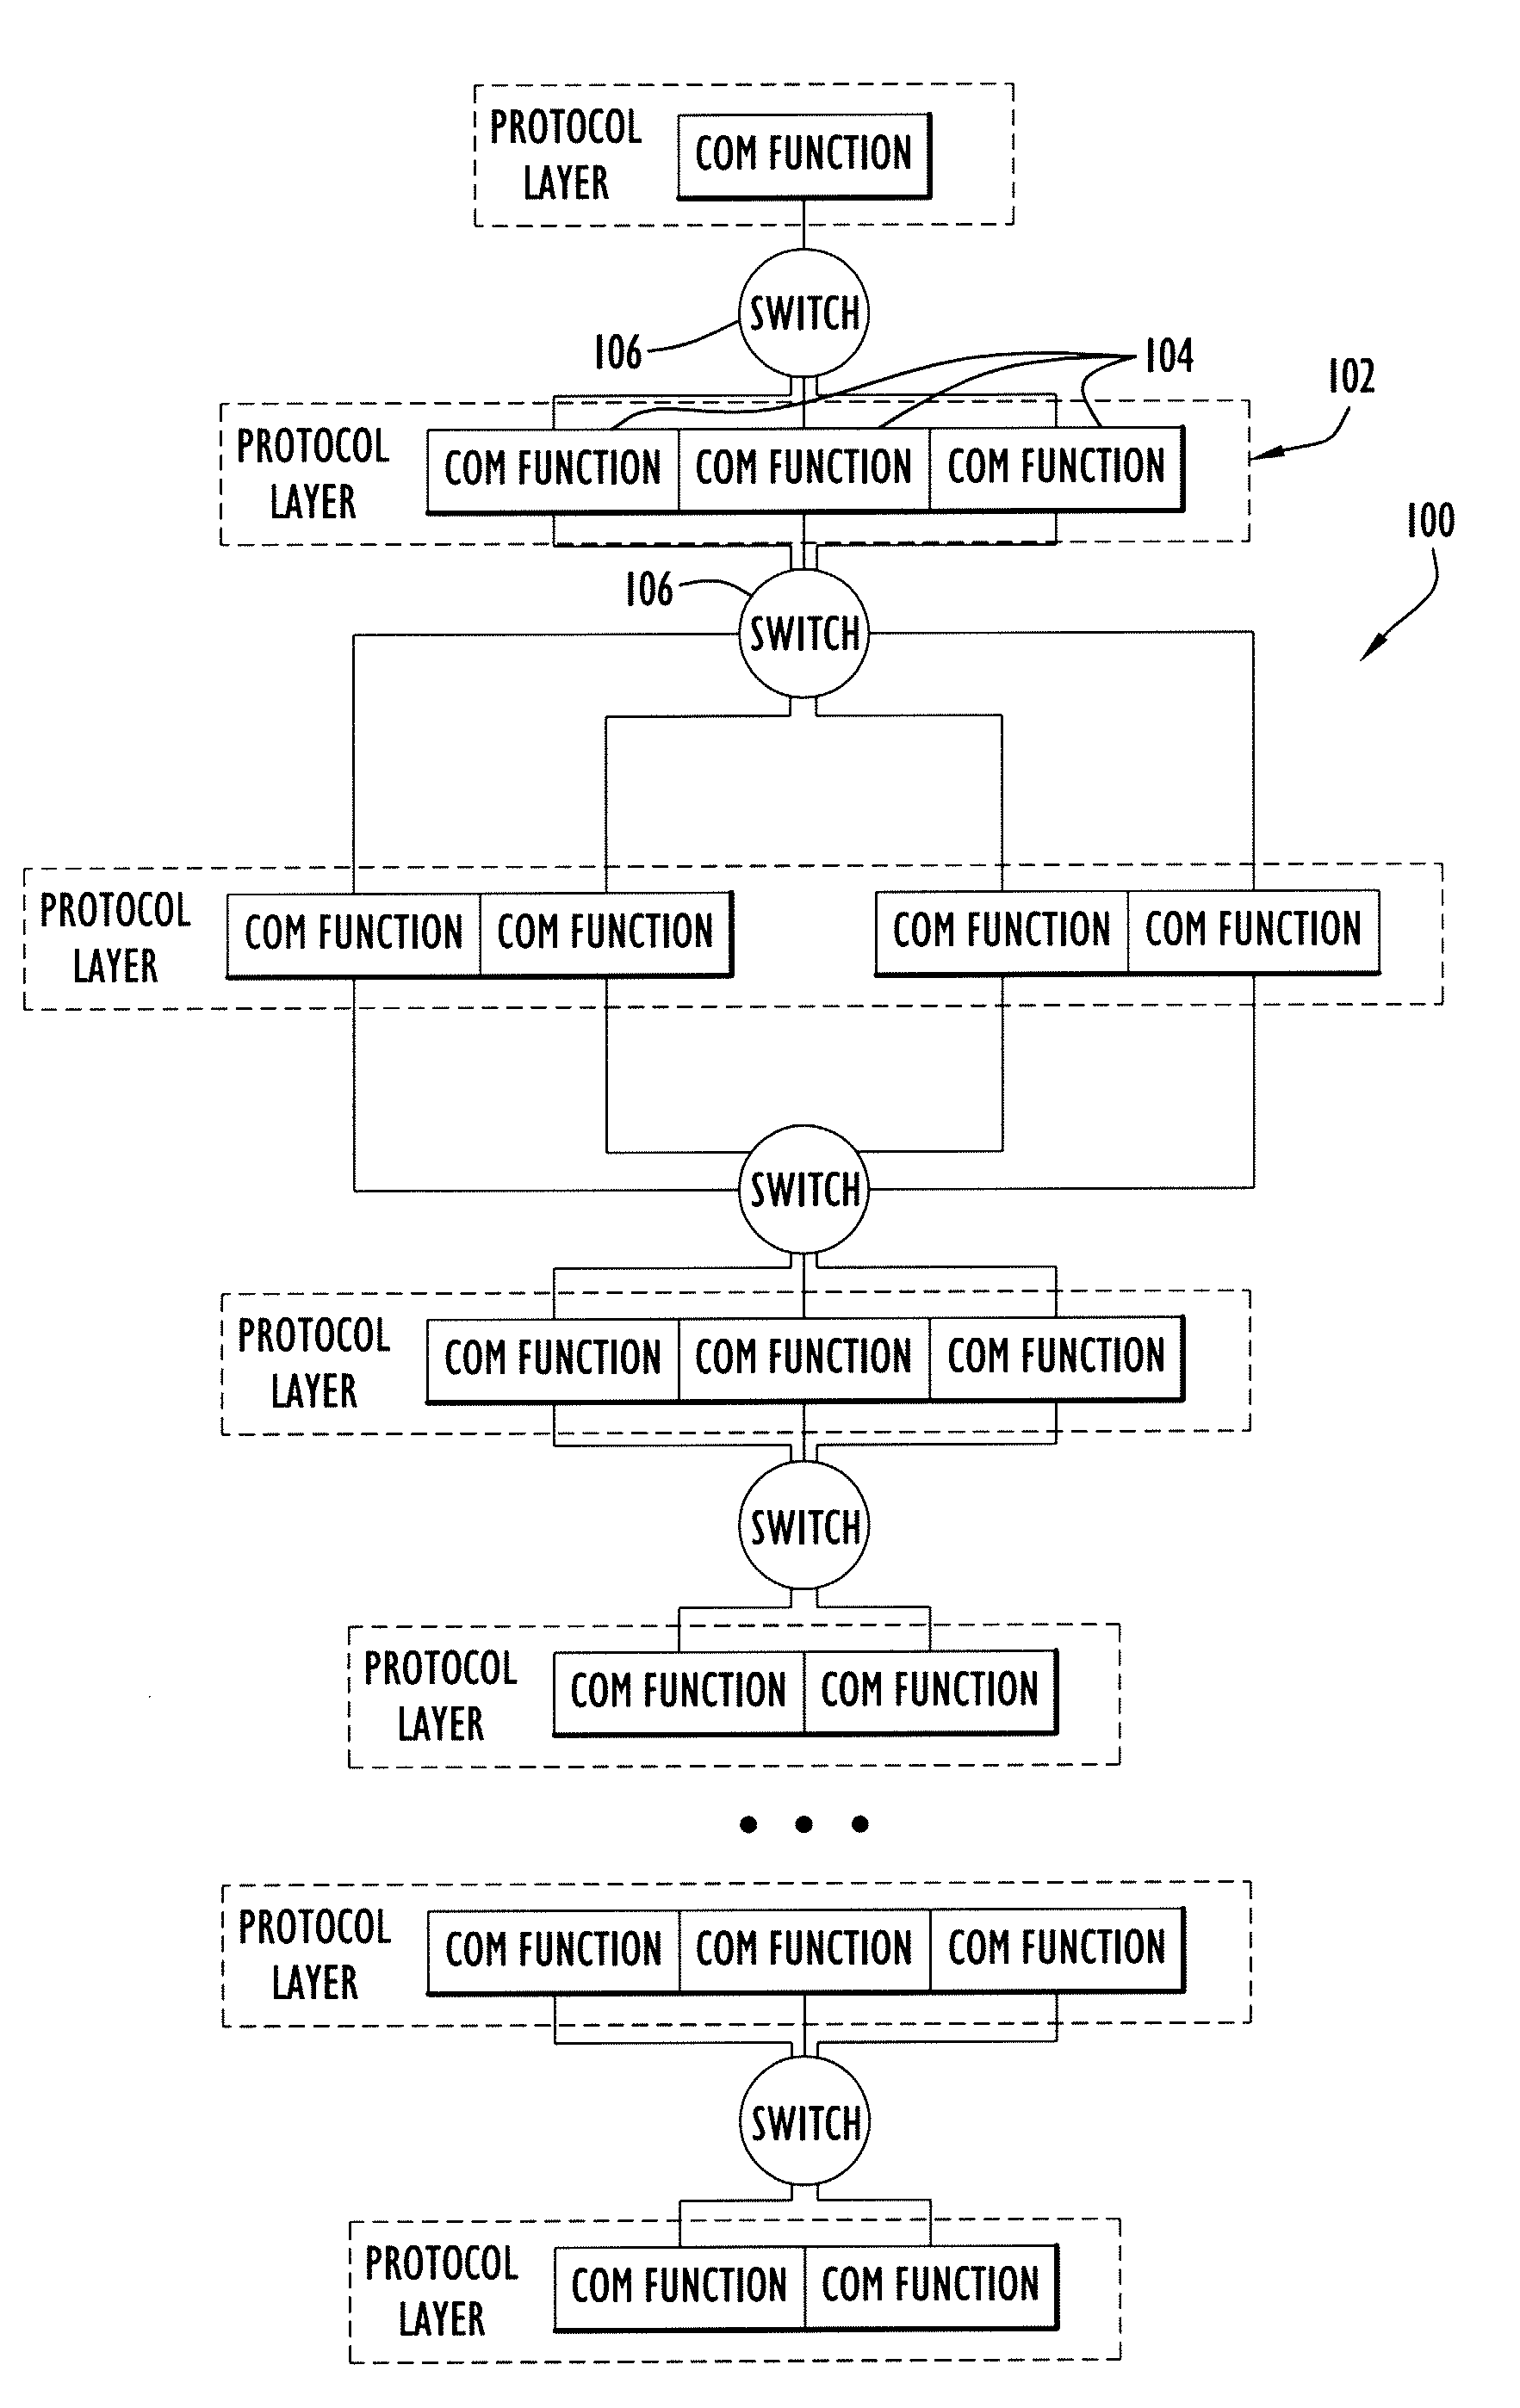 Network modeling system and method of simulating network operation with configurable node models